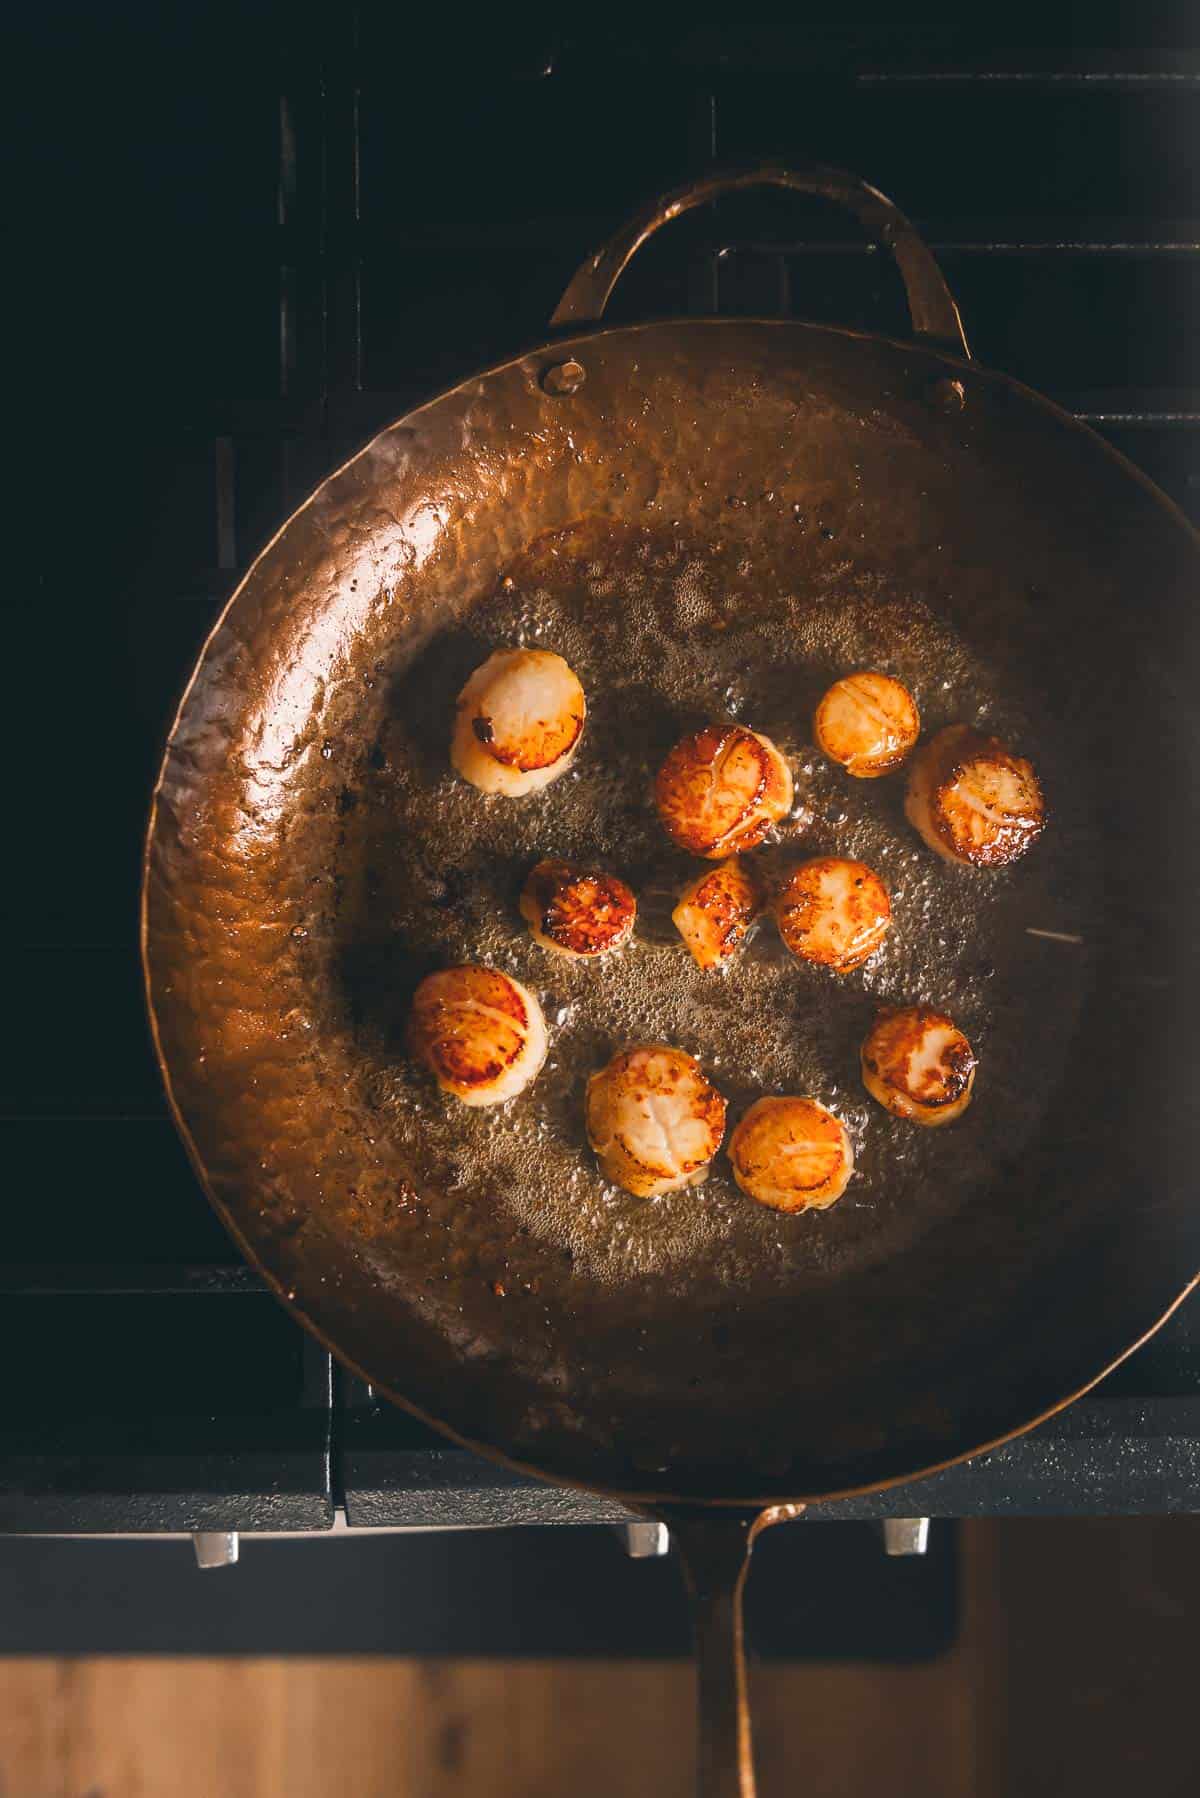 Scallops in a frying pan on the stove.